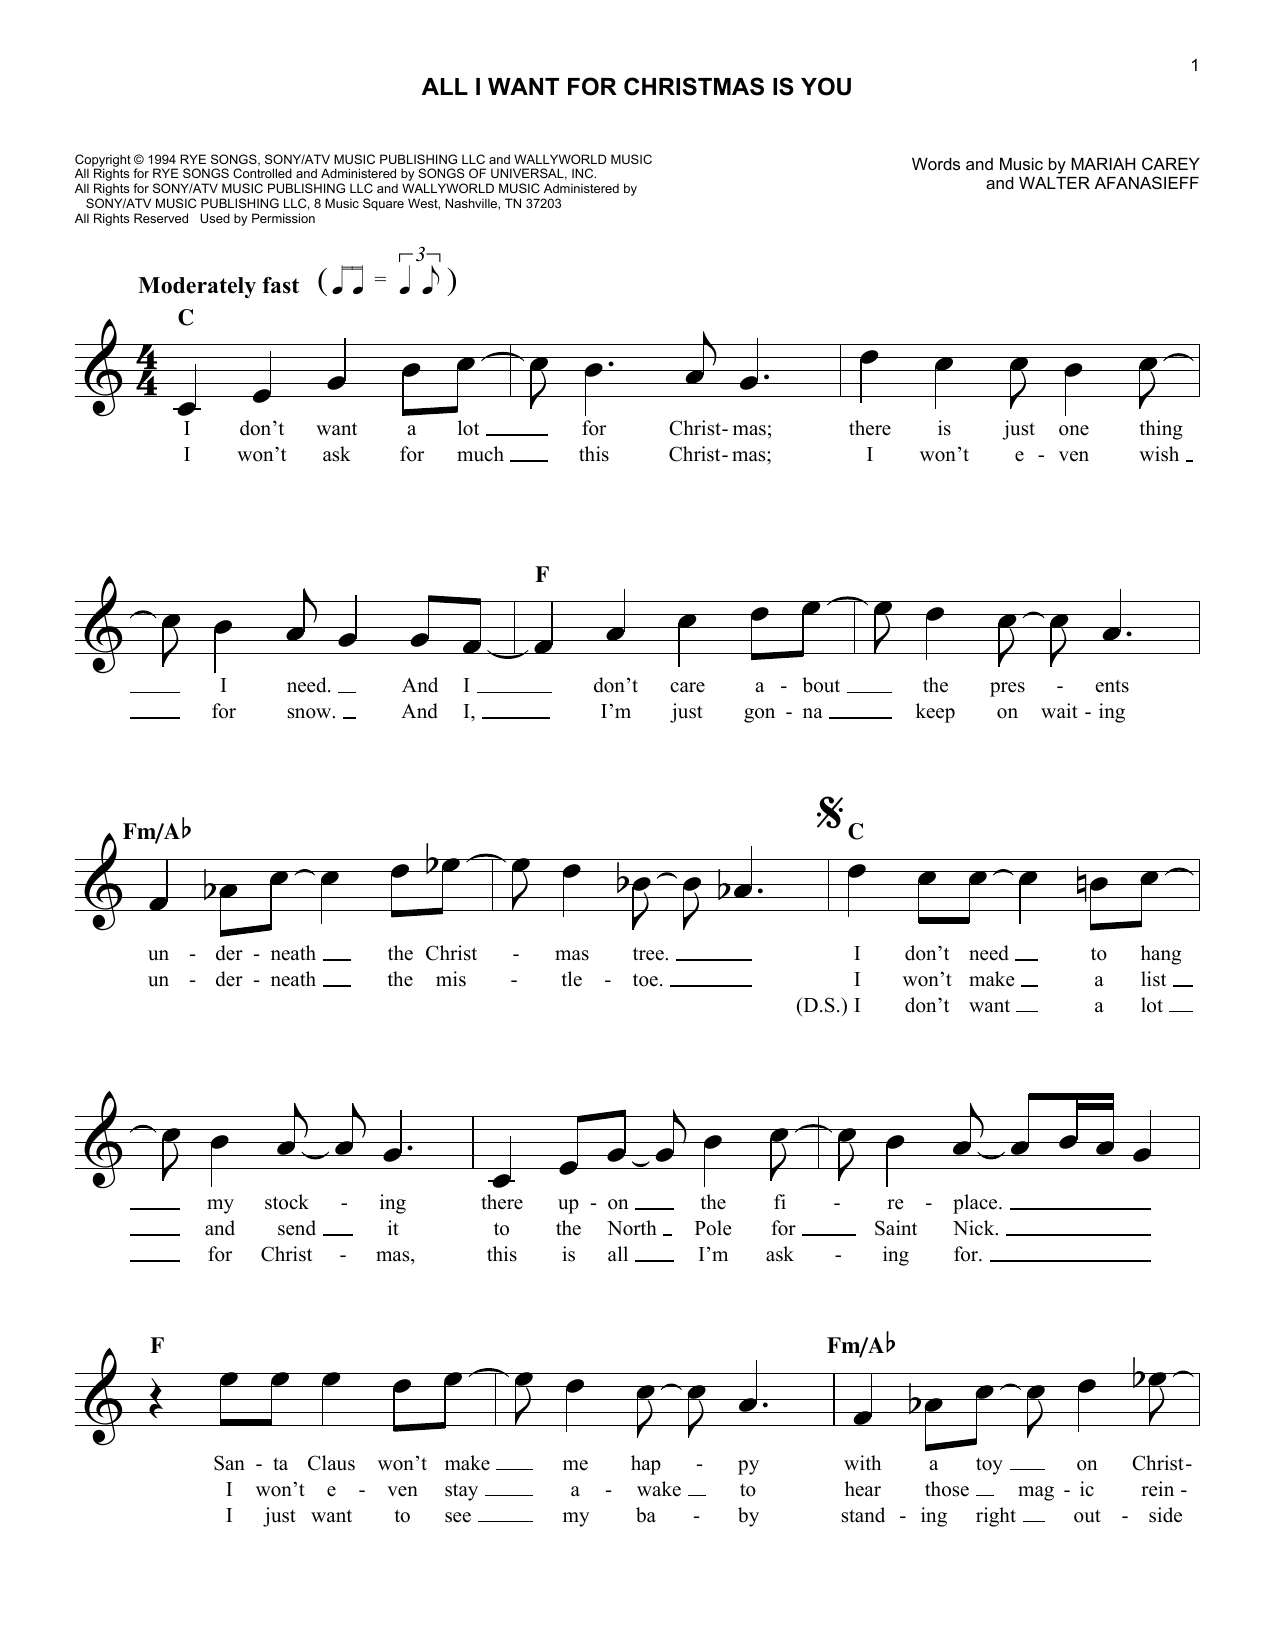 Download Mariah Carey All I Want For Christmas Is You Sheet Music